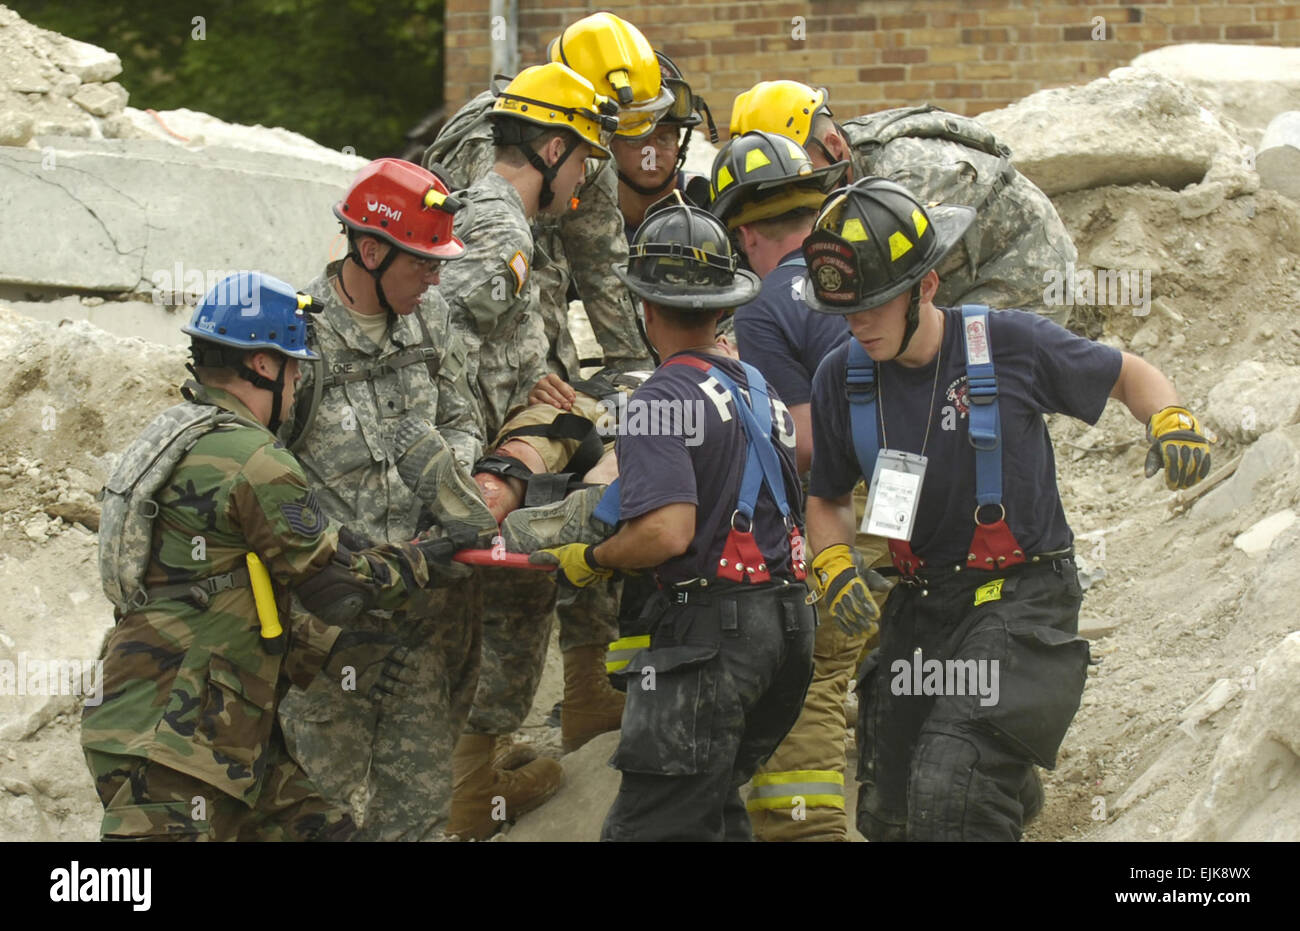 U.S. Army and Air National Guard members assigned to the Ohio National Guard's Chemical, Biological, Radiological, Nuclear Enhanced Response Force Package practice extracting victims trapped in the rubble of a collapsed building during Vigilant Guard at the Muscatatuk Urban Training Center near North Vernon, Ind., May 11, 2007. Vigilant Guard exercise is a joint military and civilian emergency management hosted by the Indiana National Guard that simulates the detonation of a nuclear device in a major metropolitan area.  Staff Sgt. Russell Lee Klika Stock Photo